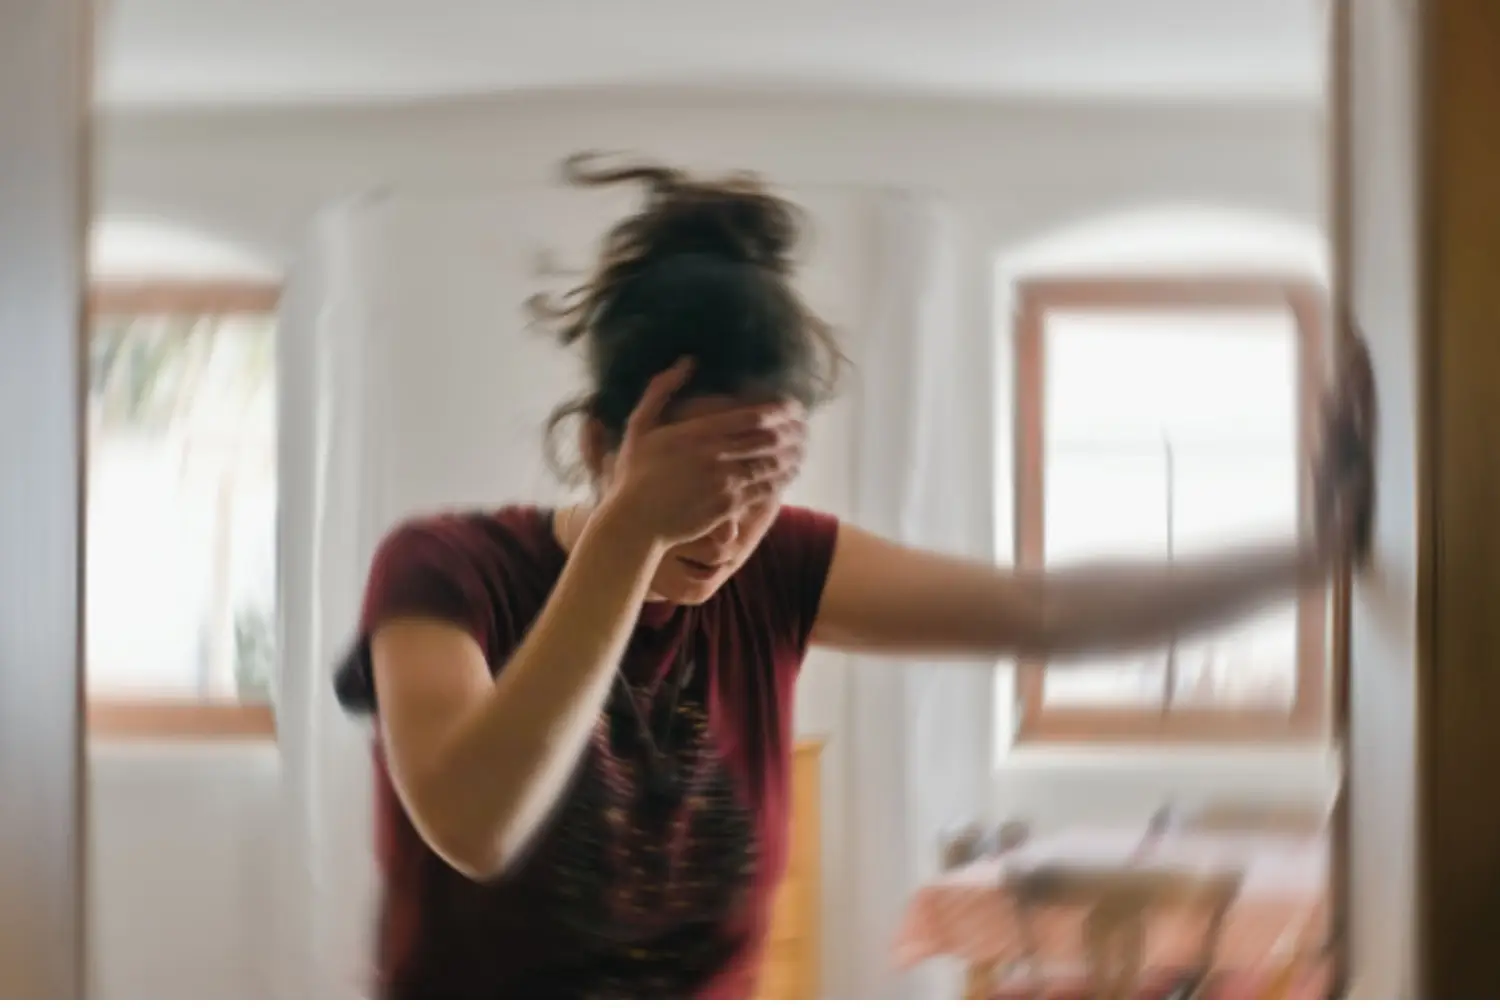 Blurry image of woman experiencing a seizure during alcohol withdrawal